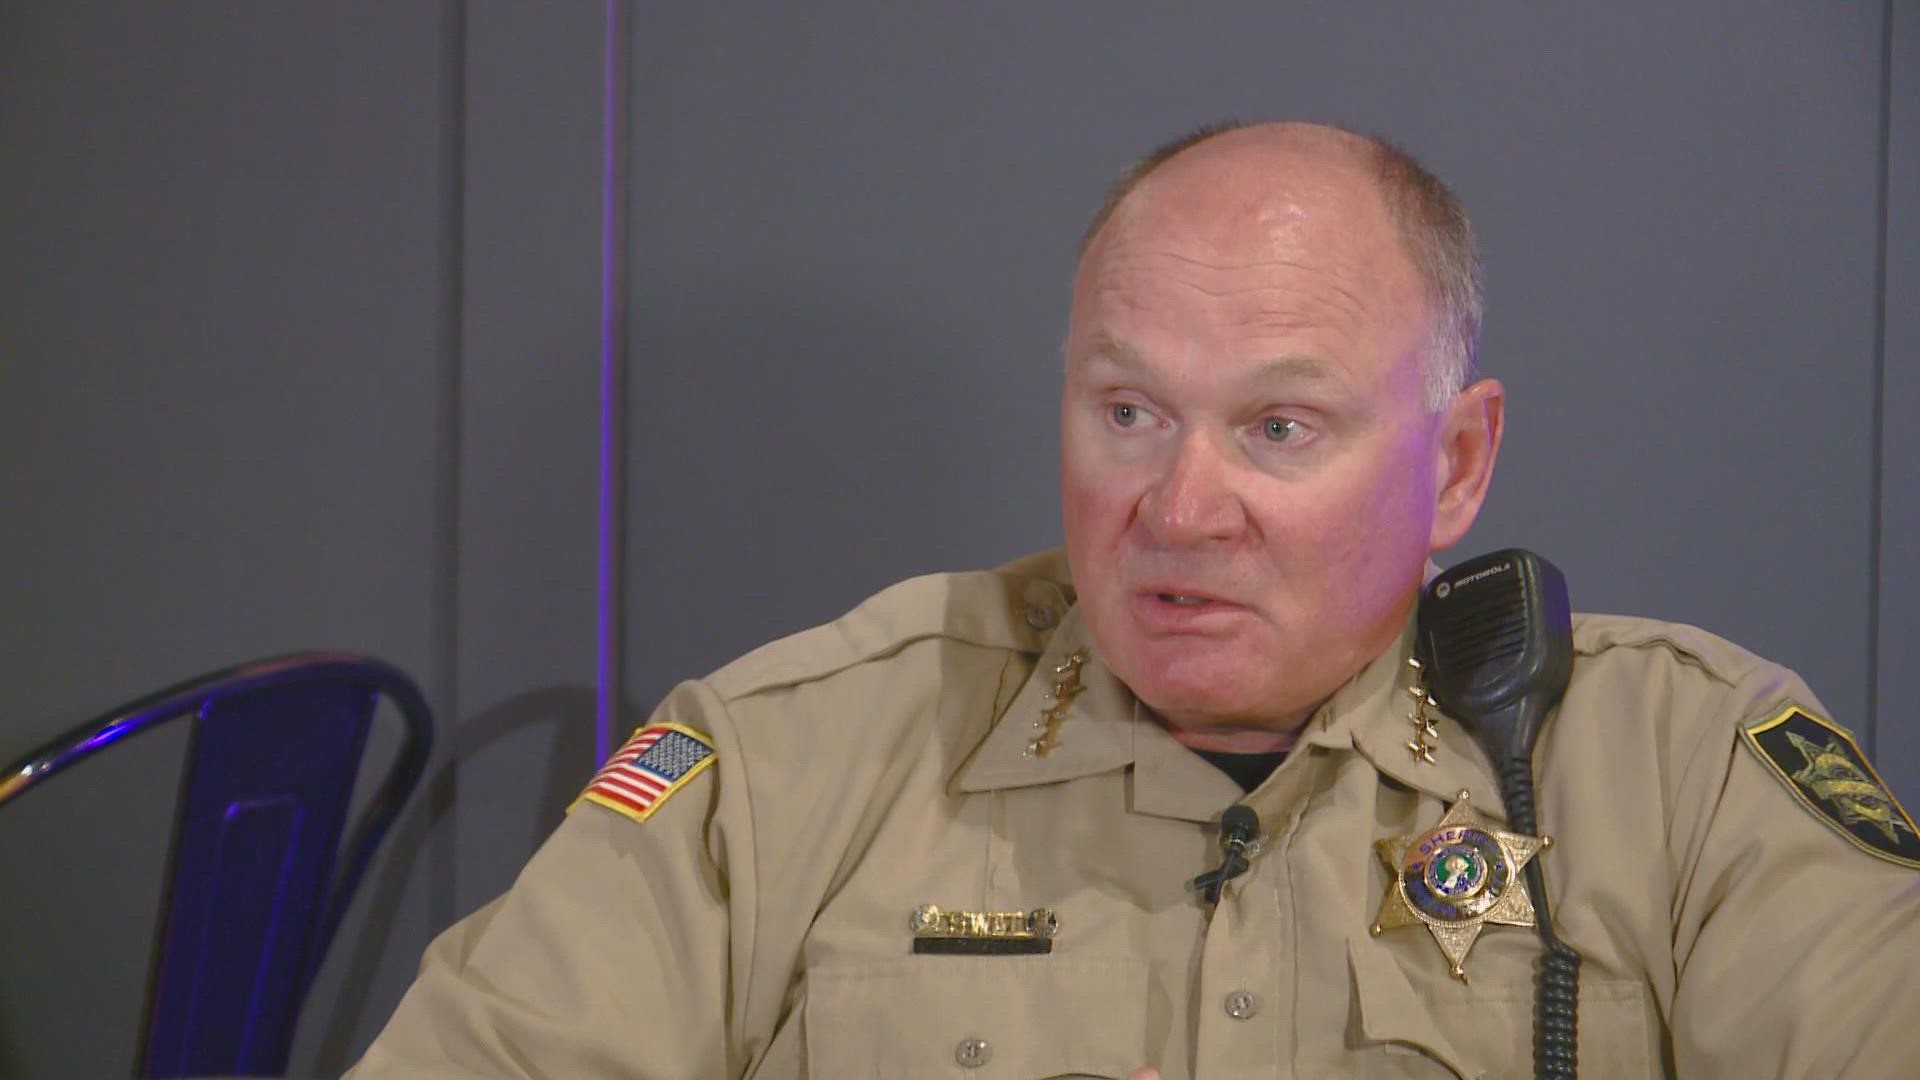 In an exclusive interview, Sheriff Ozzie Knezovich says he met with law enforcement agencies and non-profits on Wednesday to discuss clearing the I-90 homeless camp.